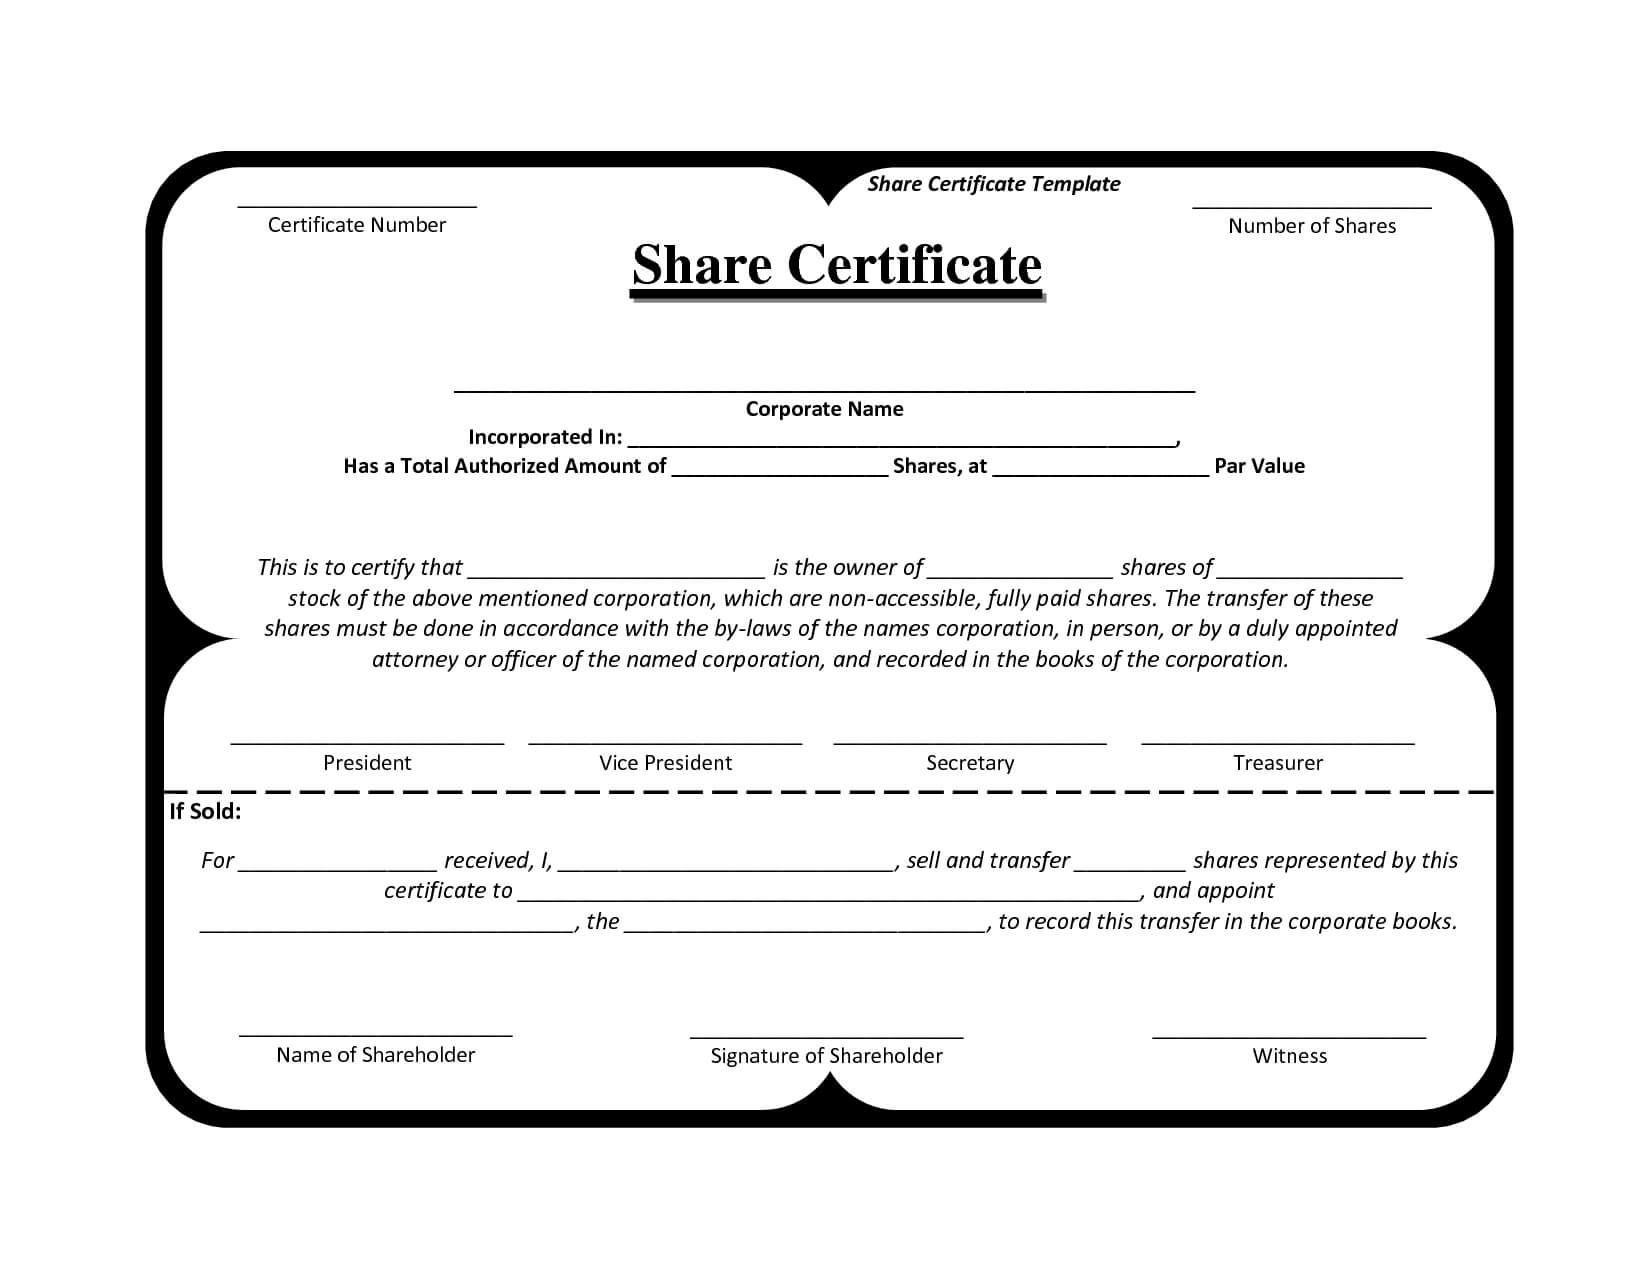 Template Share Certificate Rbscqi9V | Certificate Templates Throughout Share Certificate Template Companies House